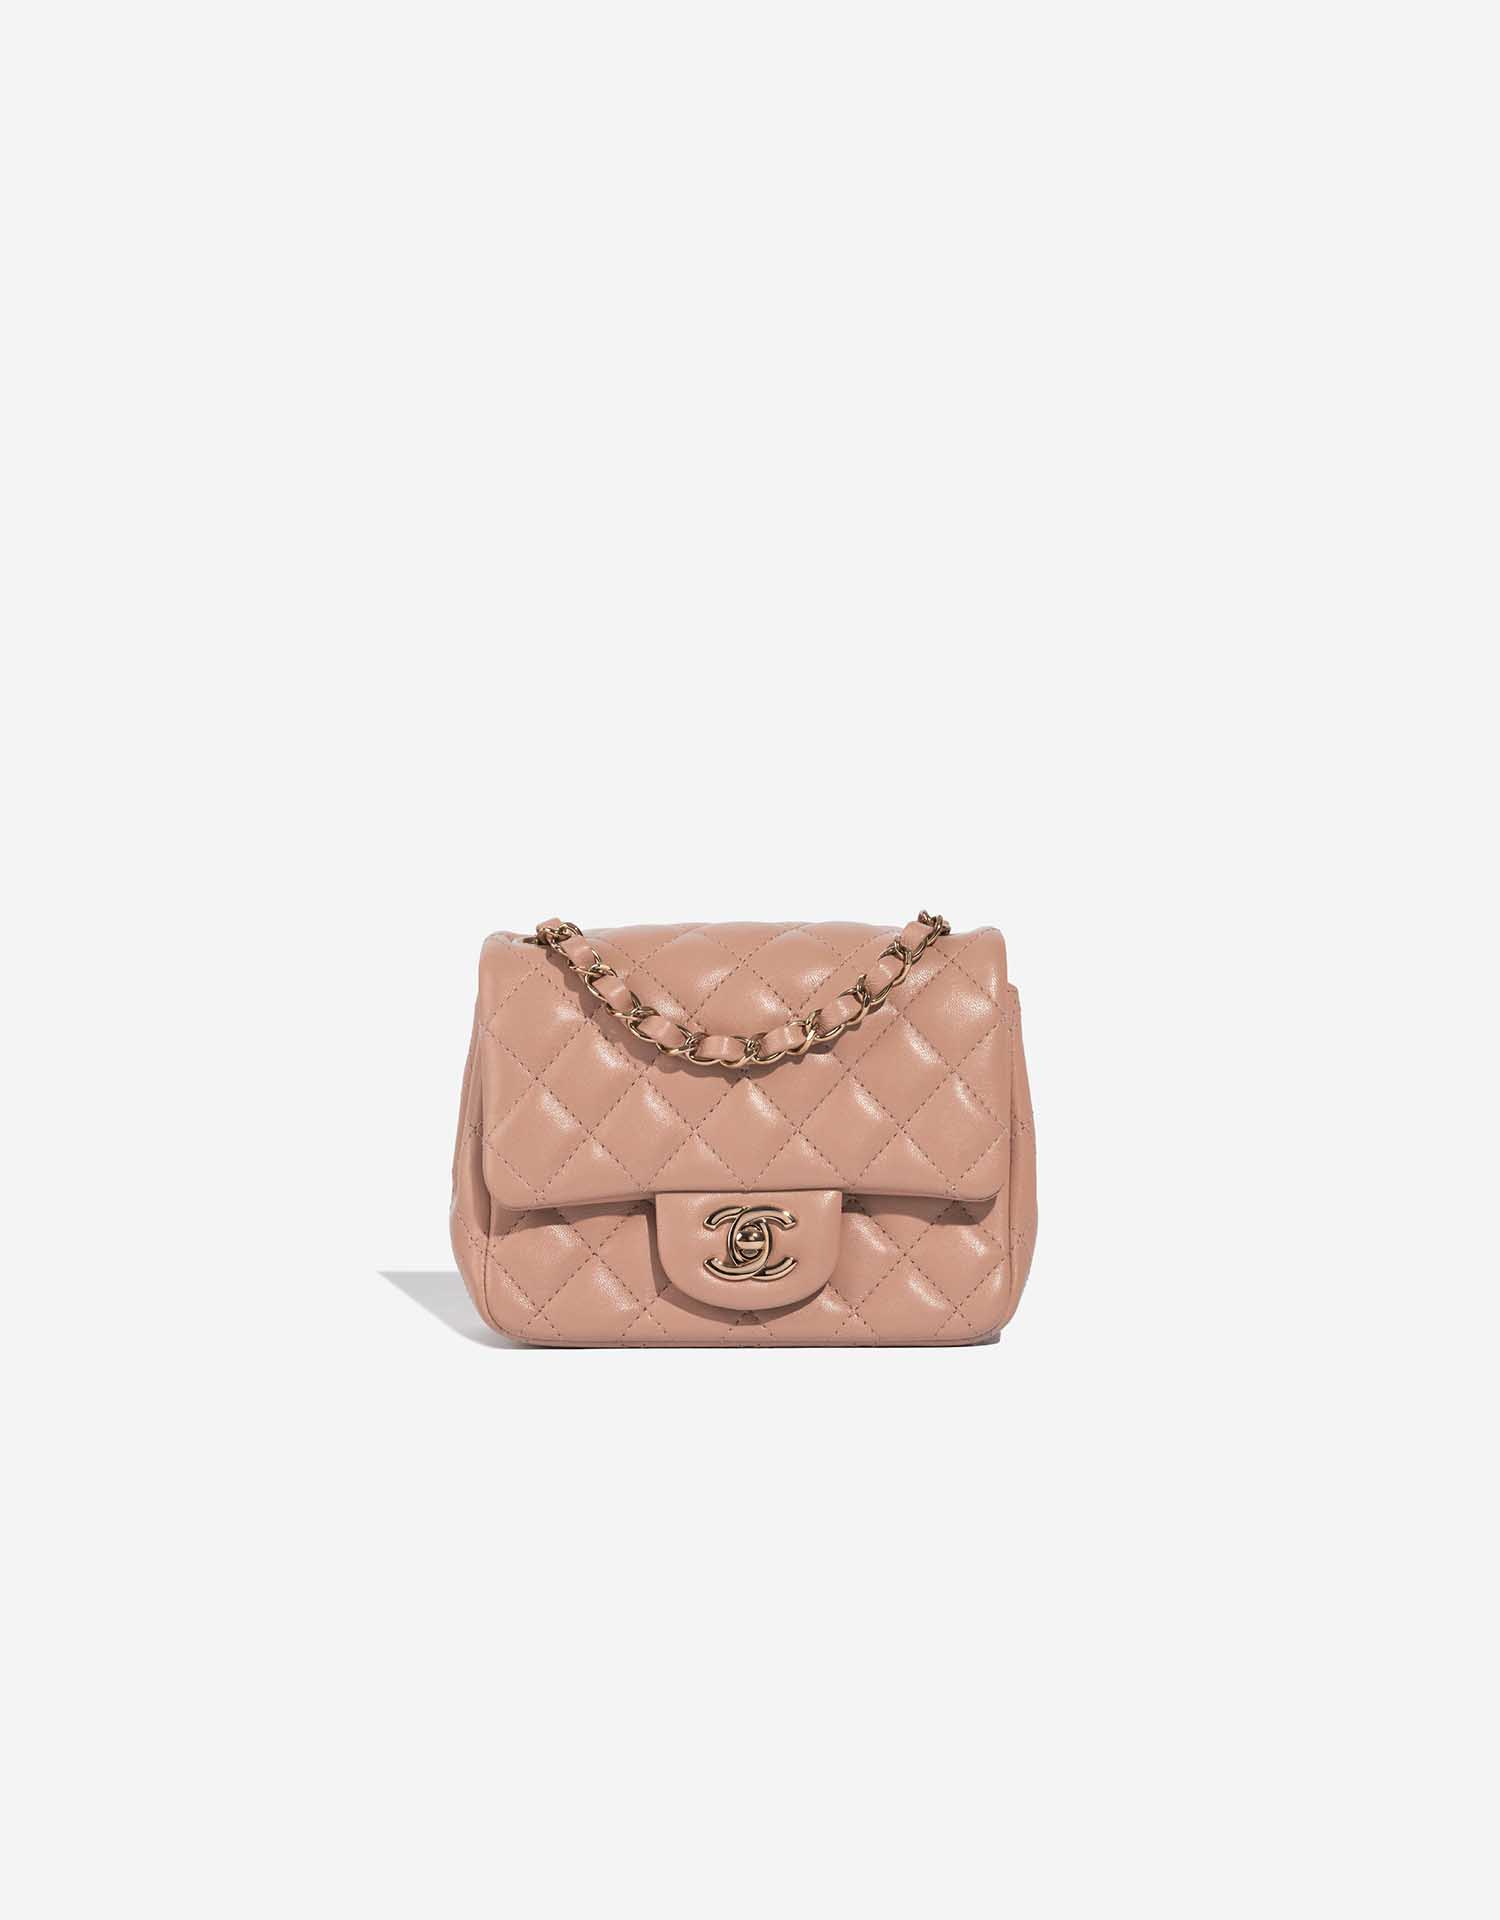 Chanel Beige Quilted Lambskin Vintage Mini Classic Single Flap Bag